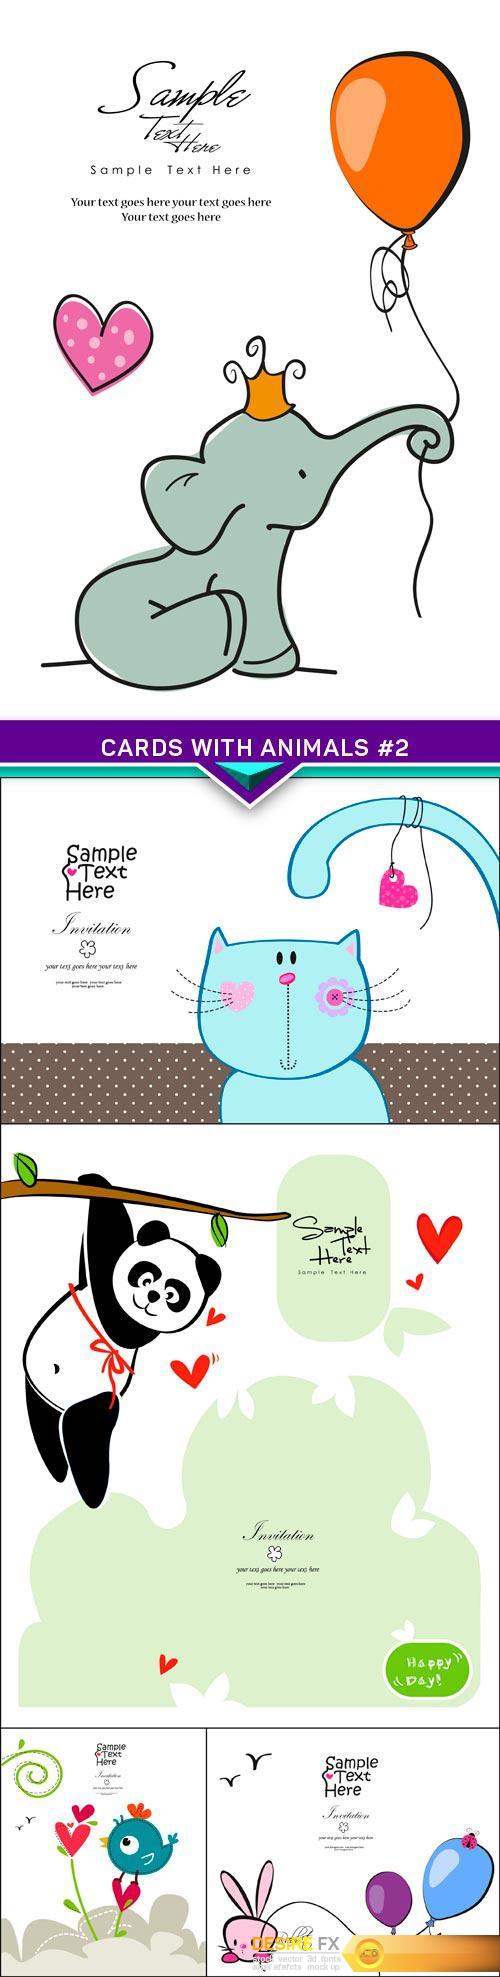 Cards with animals #2 5x EPS